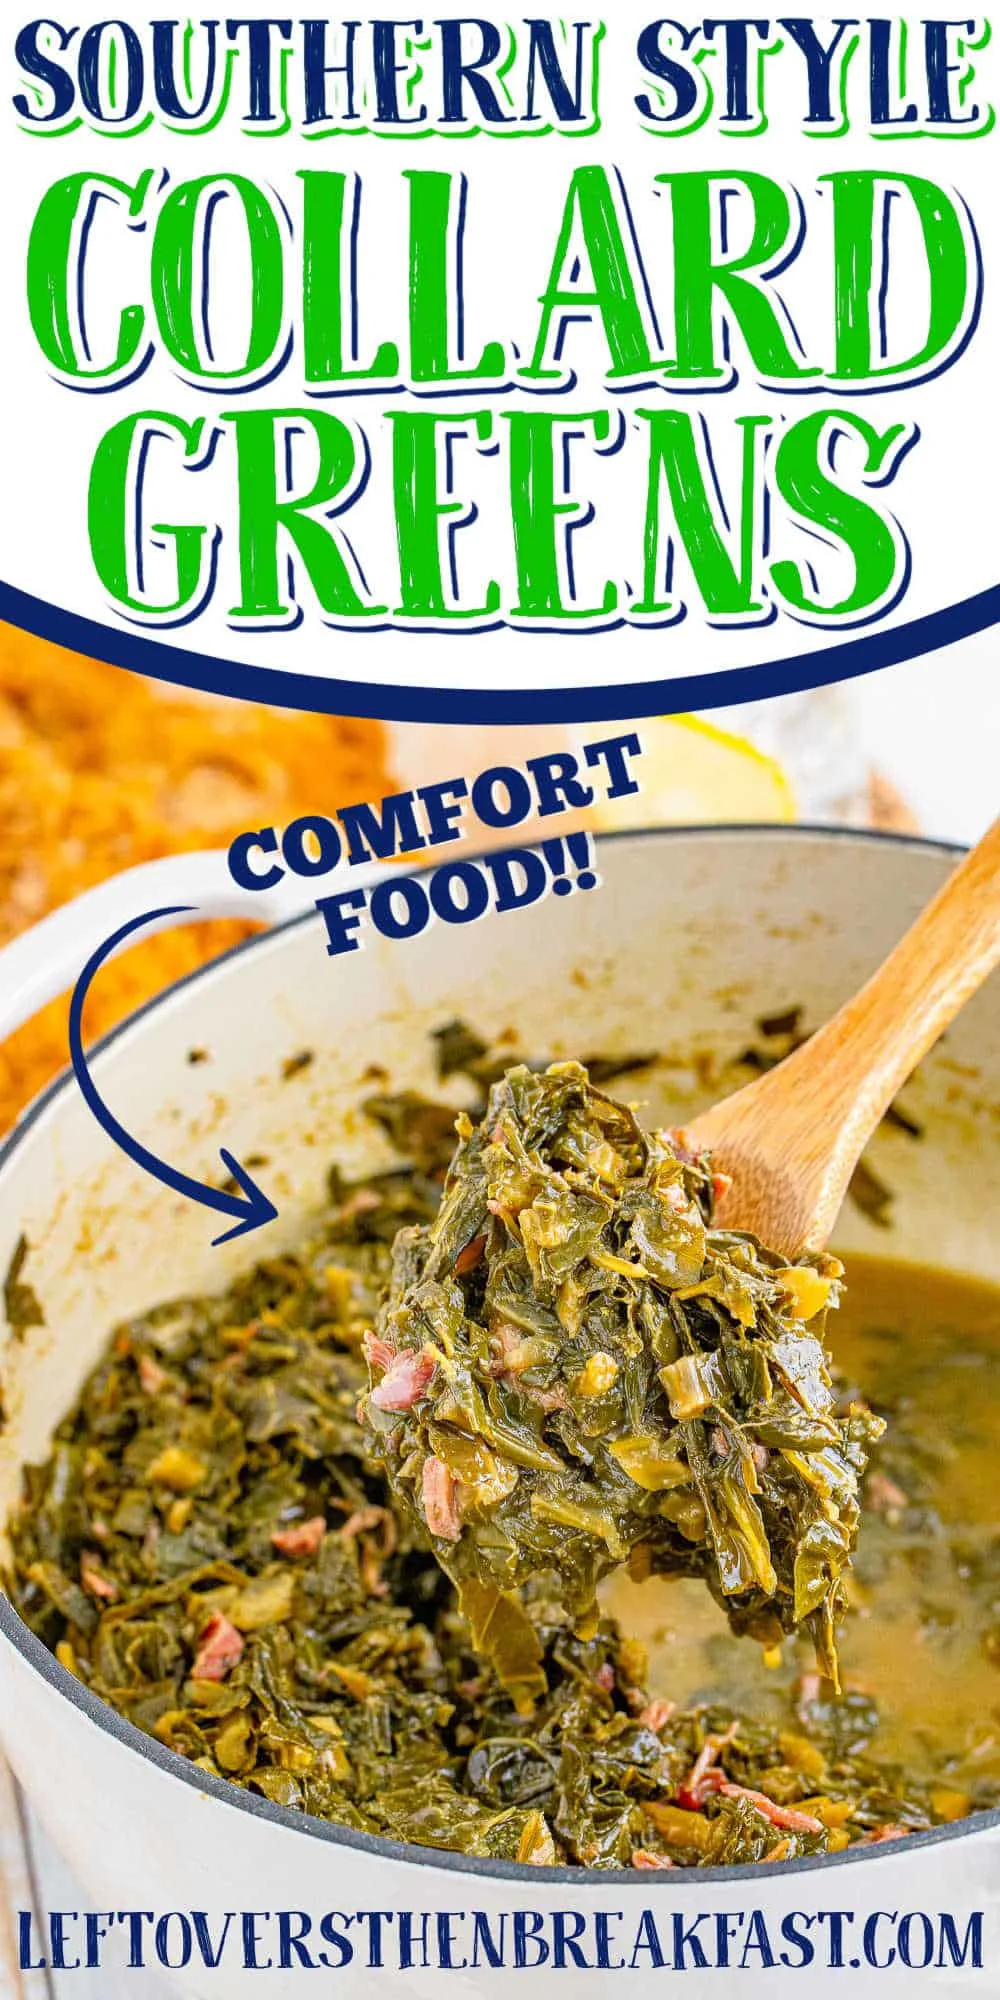 pot of collard with text "southern style collard greens"